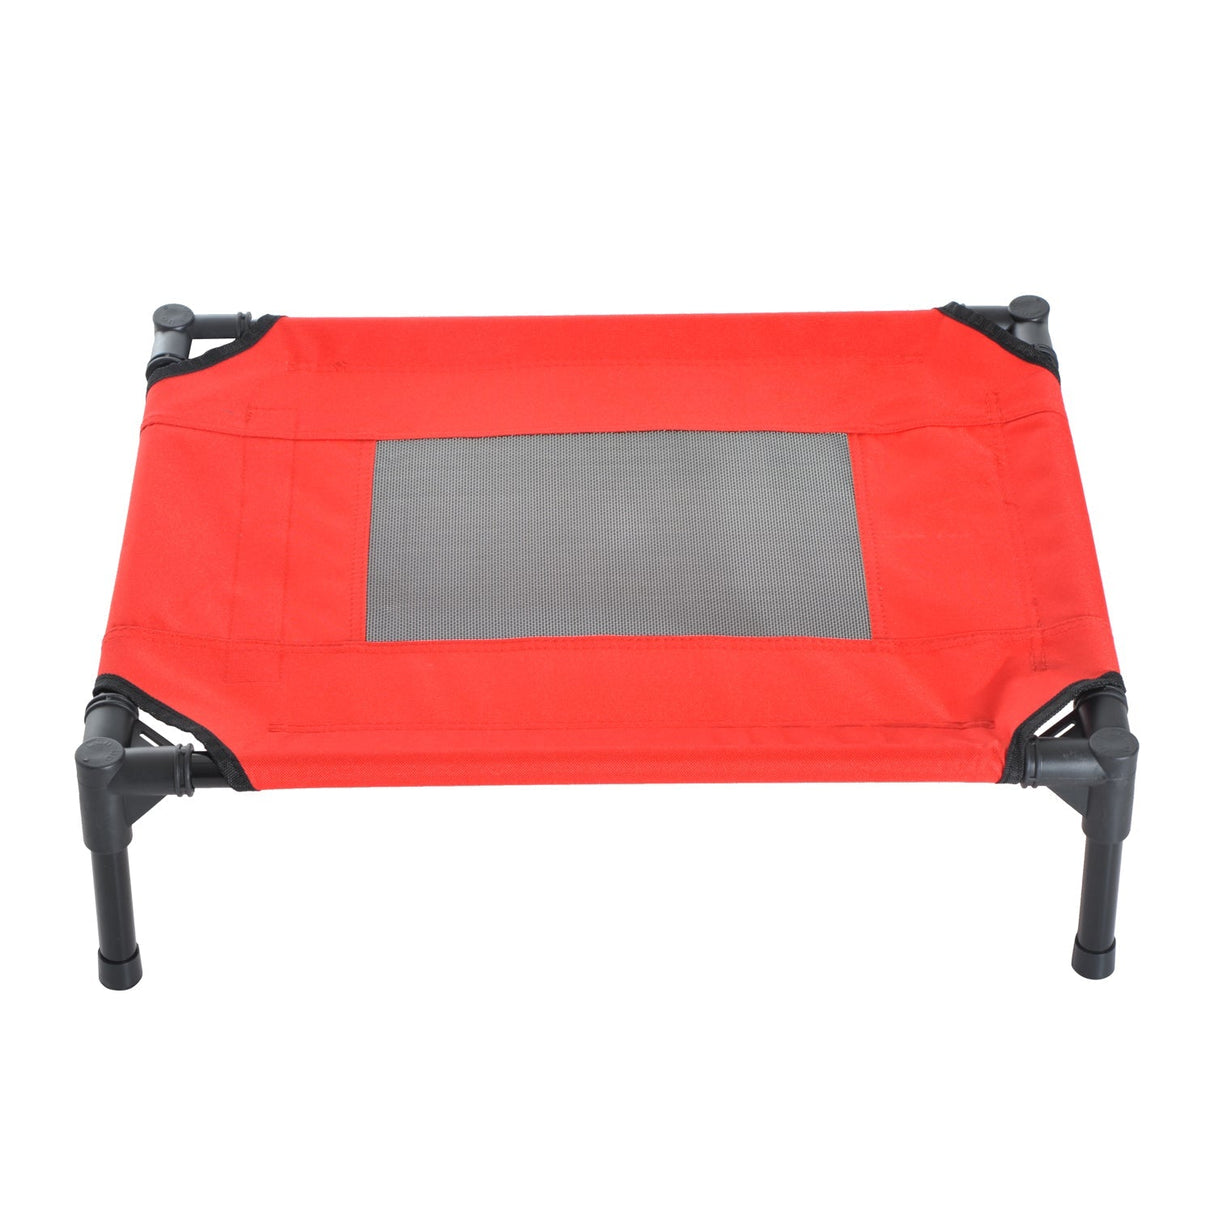 Elevated Pet Bed Portable Camping Raised Dog Bed w/ Metal Frame and (Small), PawHut,